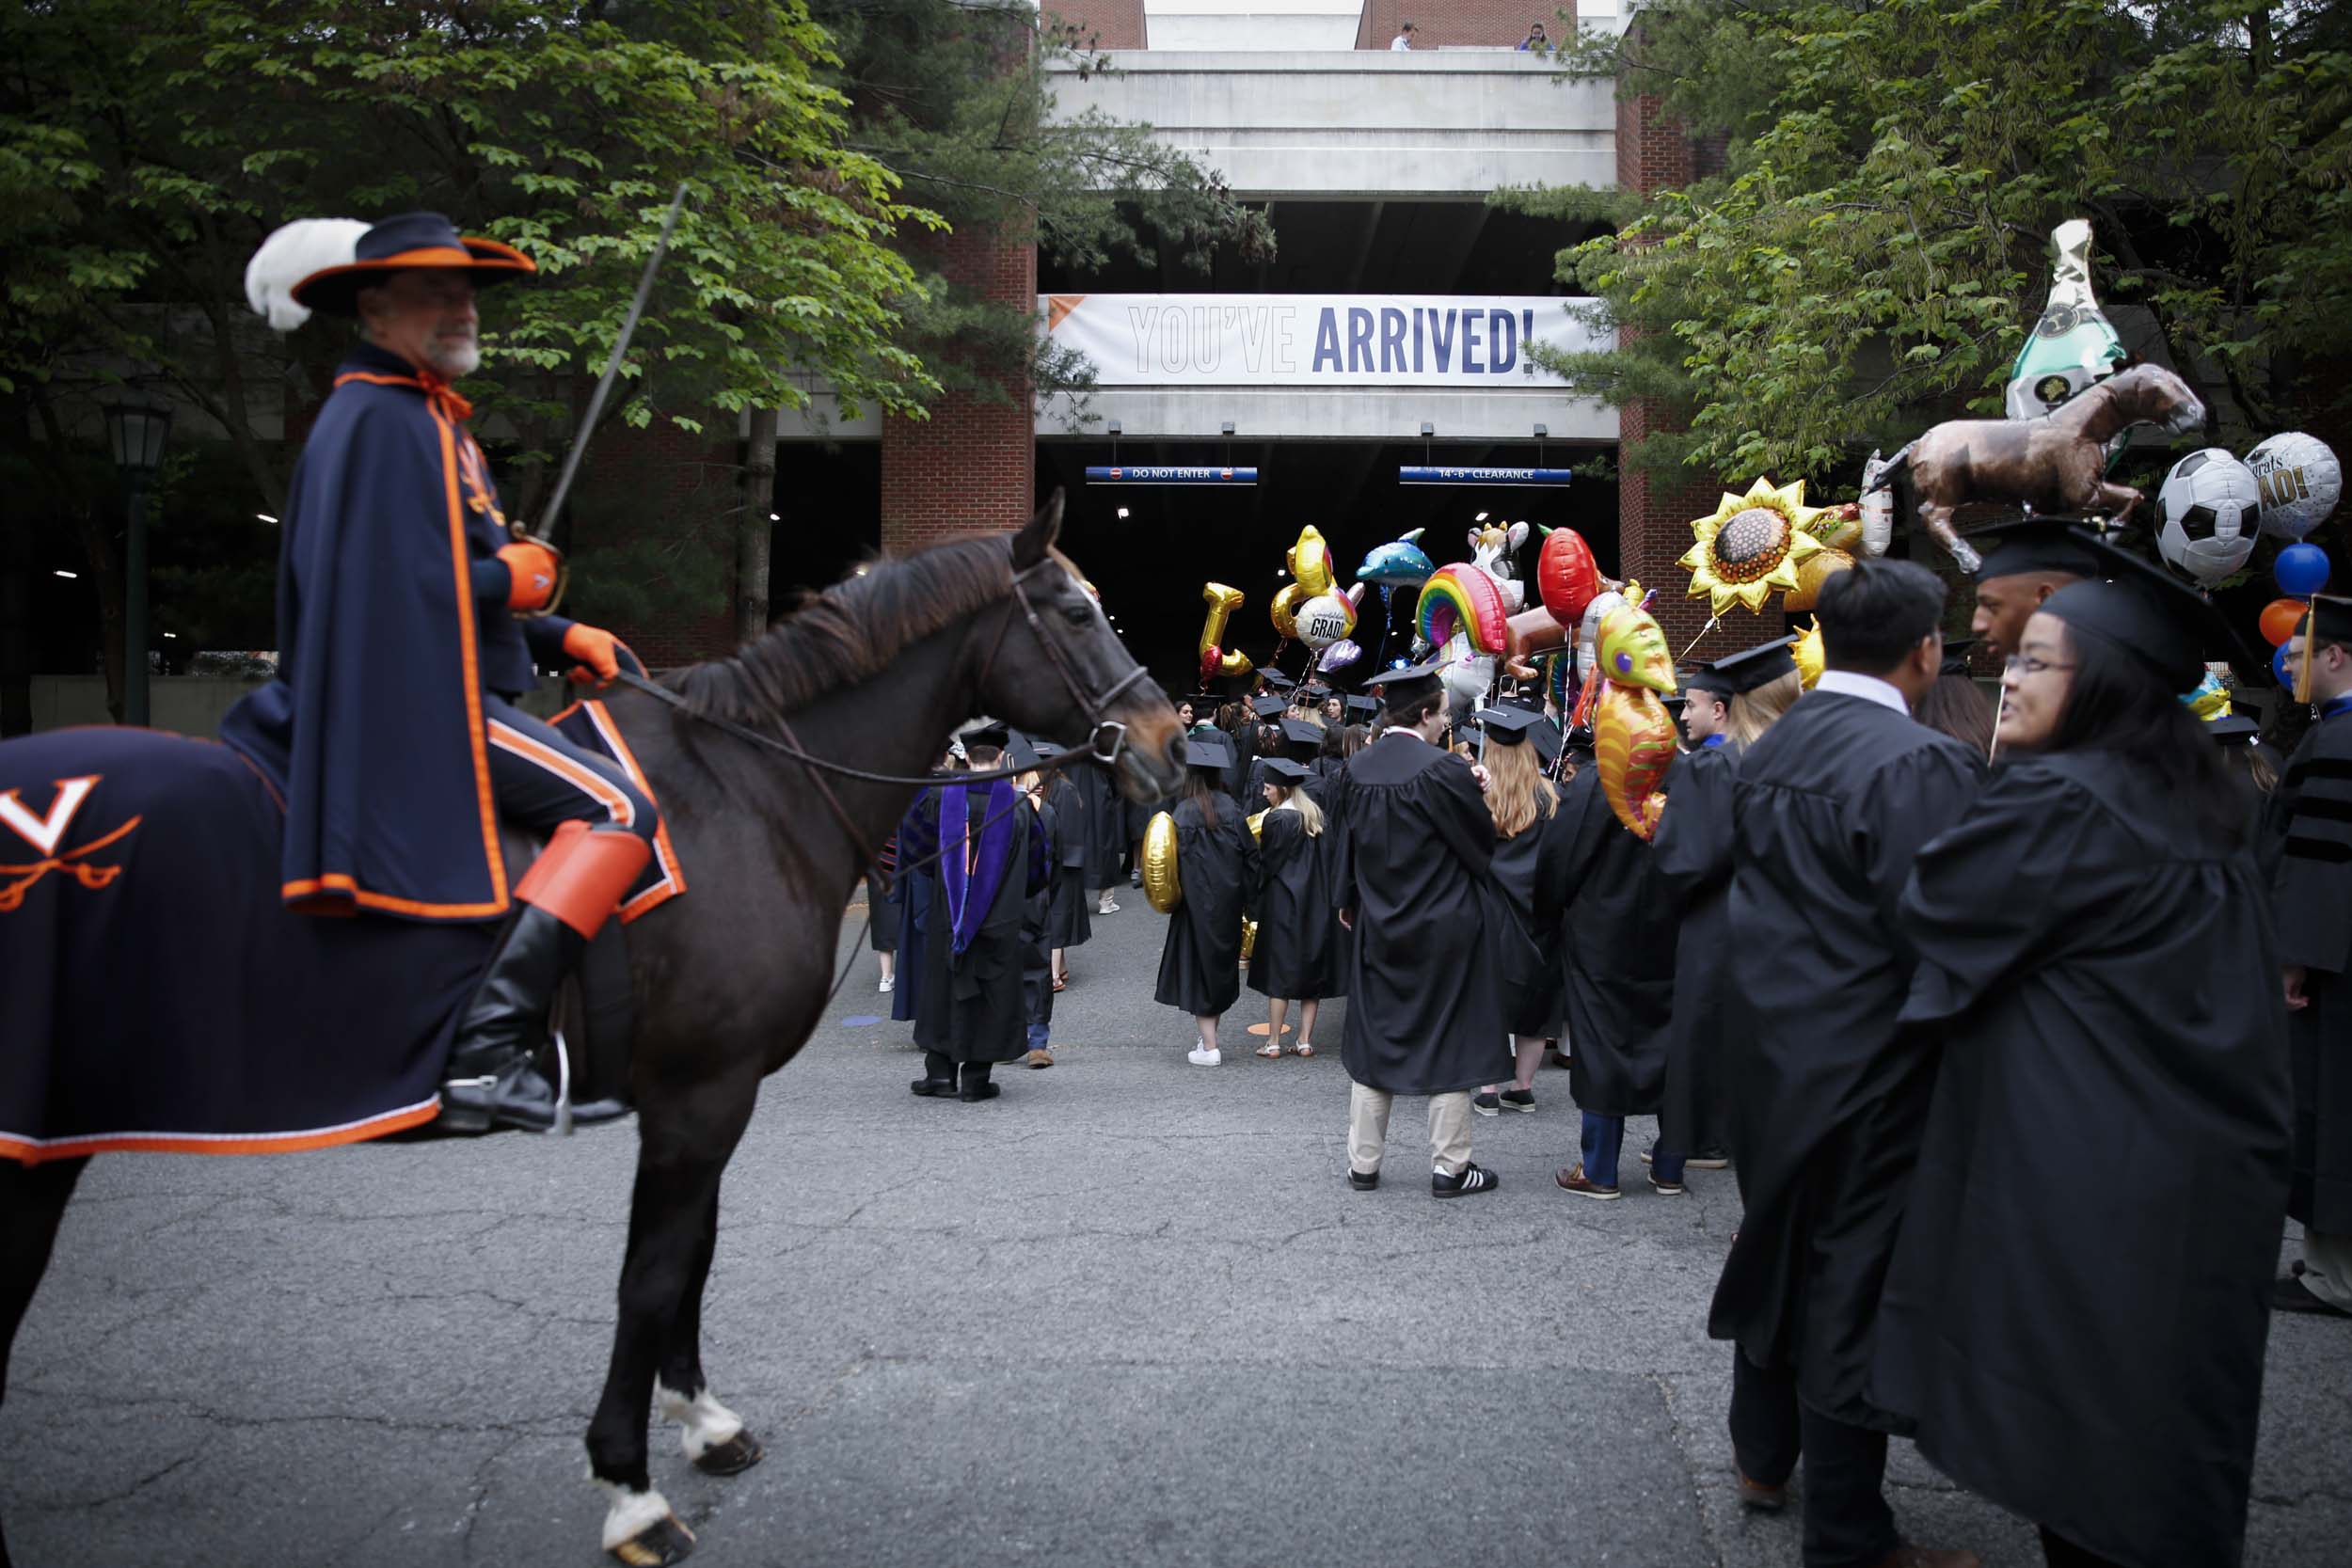 Graduates walking into final exercises with a Cavalier on a horse watching